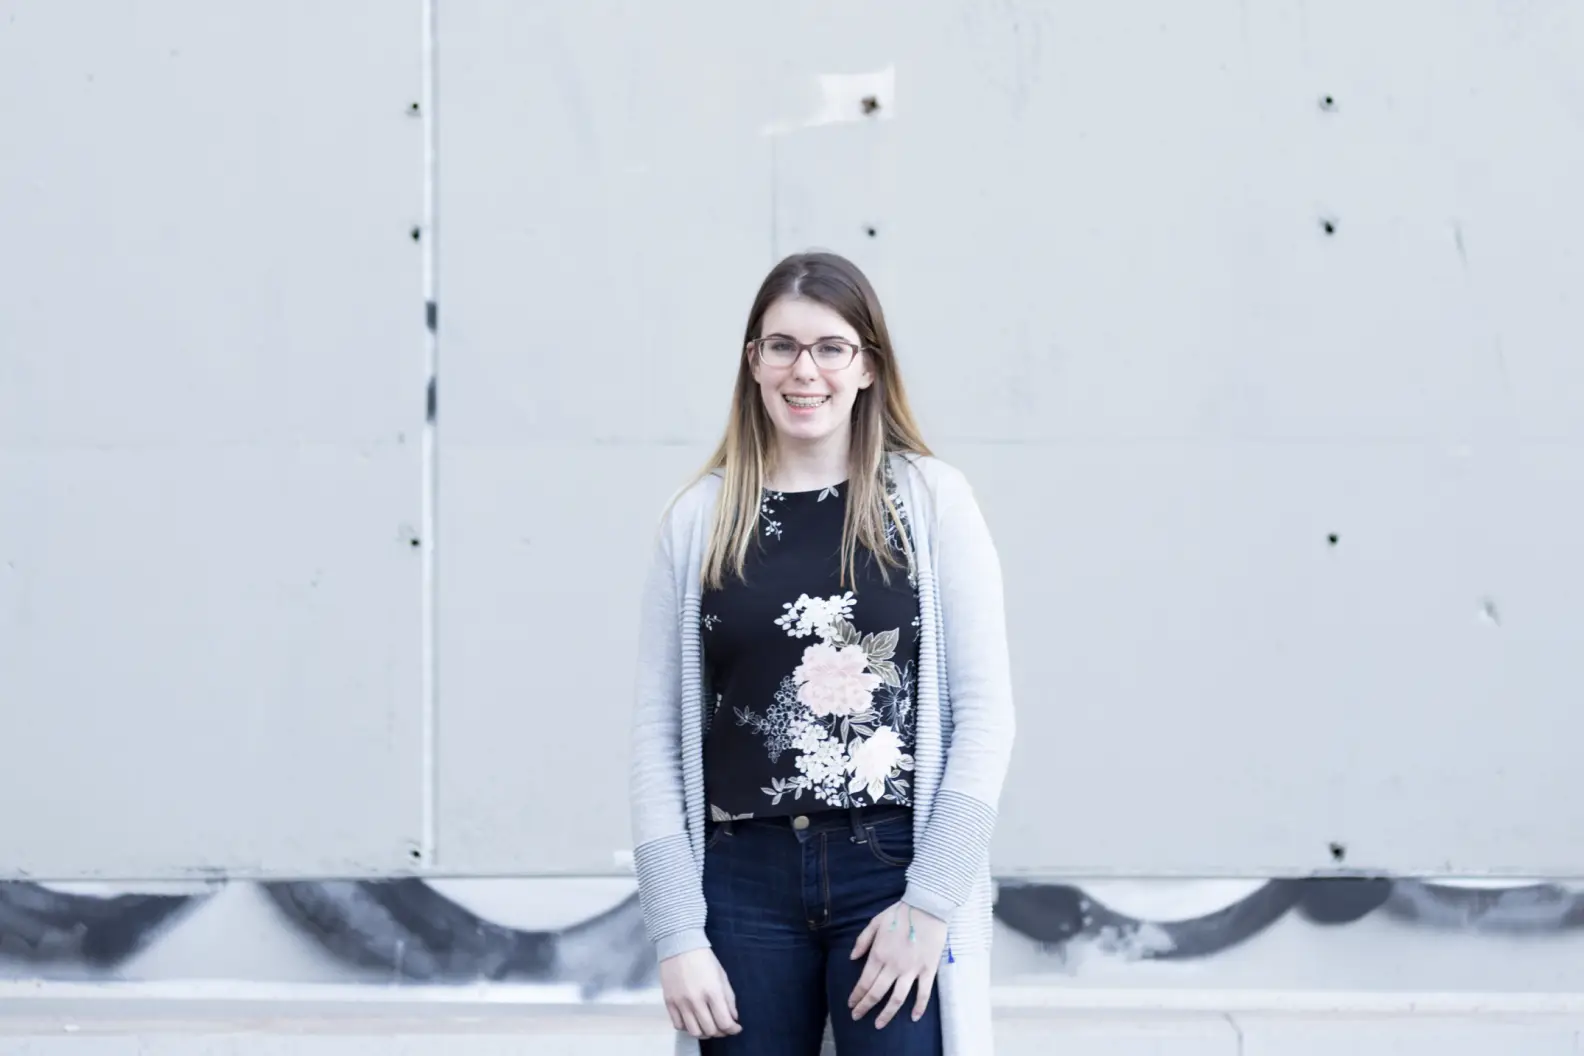 Young woman with long brown hair and glasses standing in front of grey concrete wall